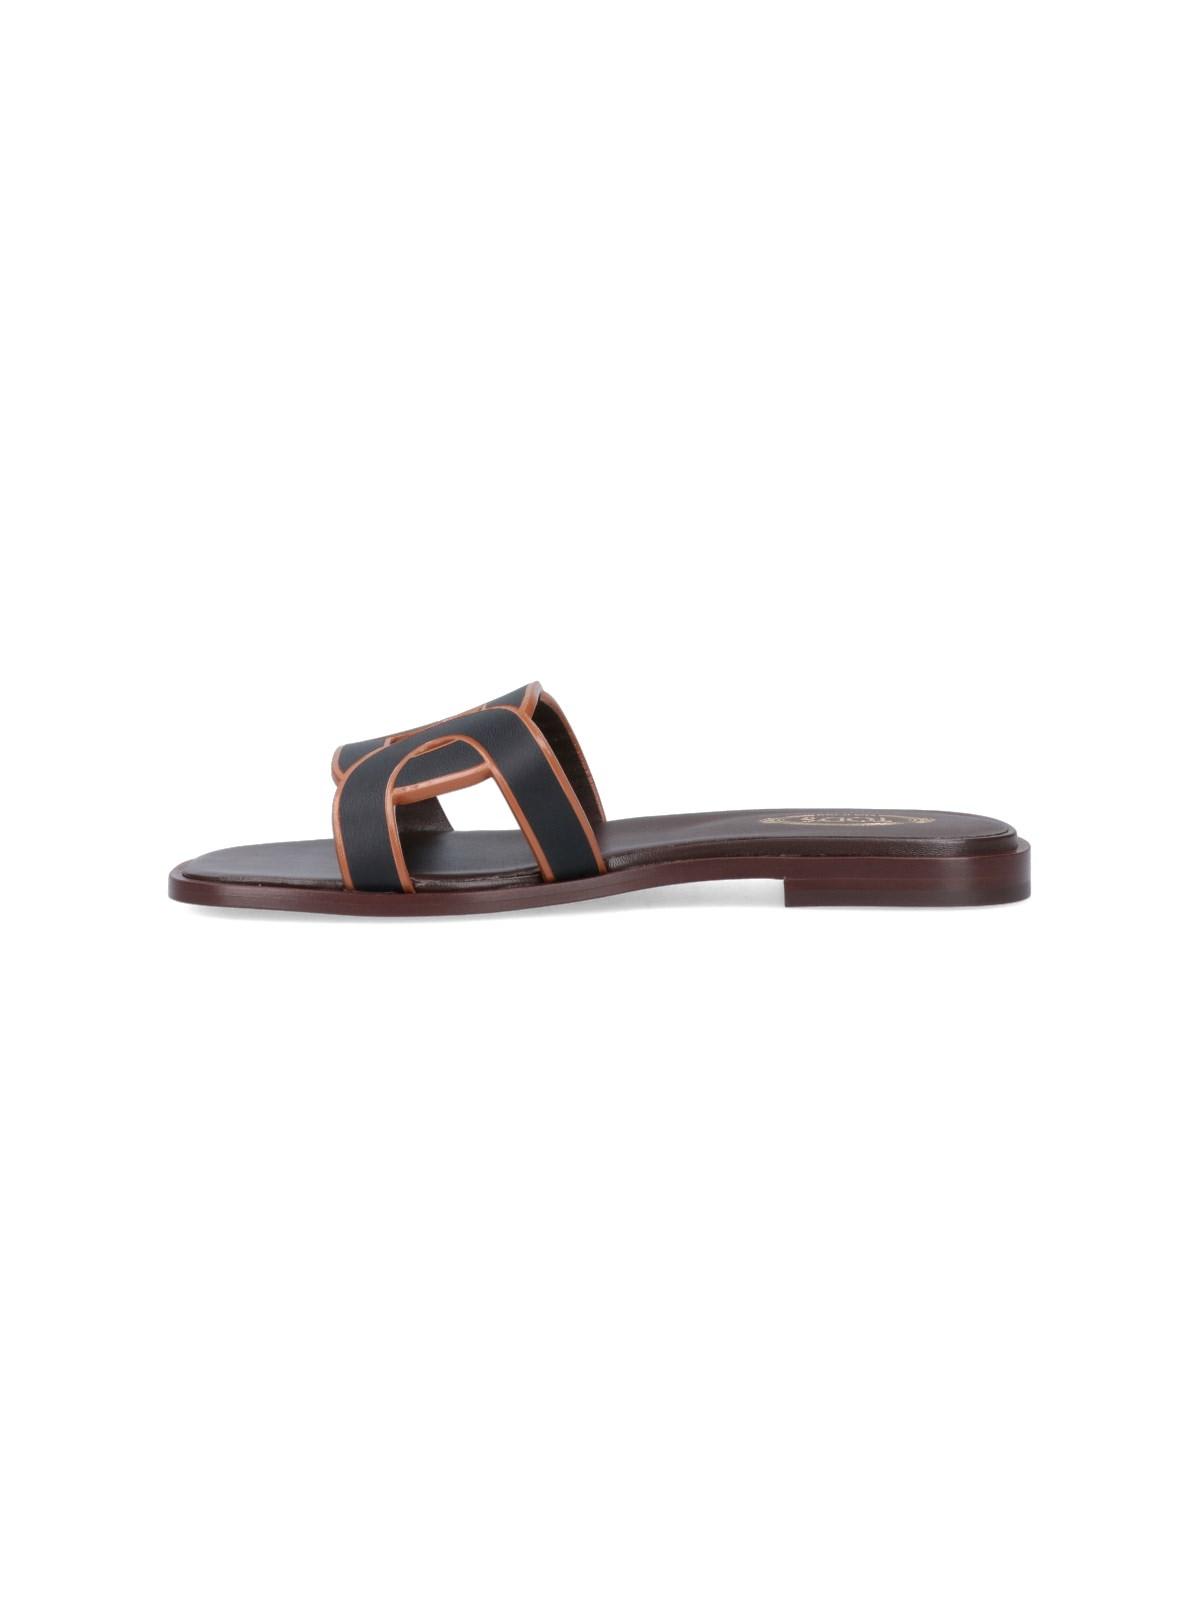 TOD'S SHAPED SANDALS